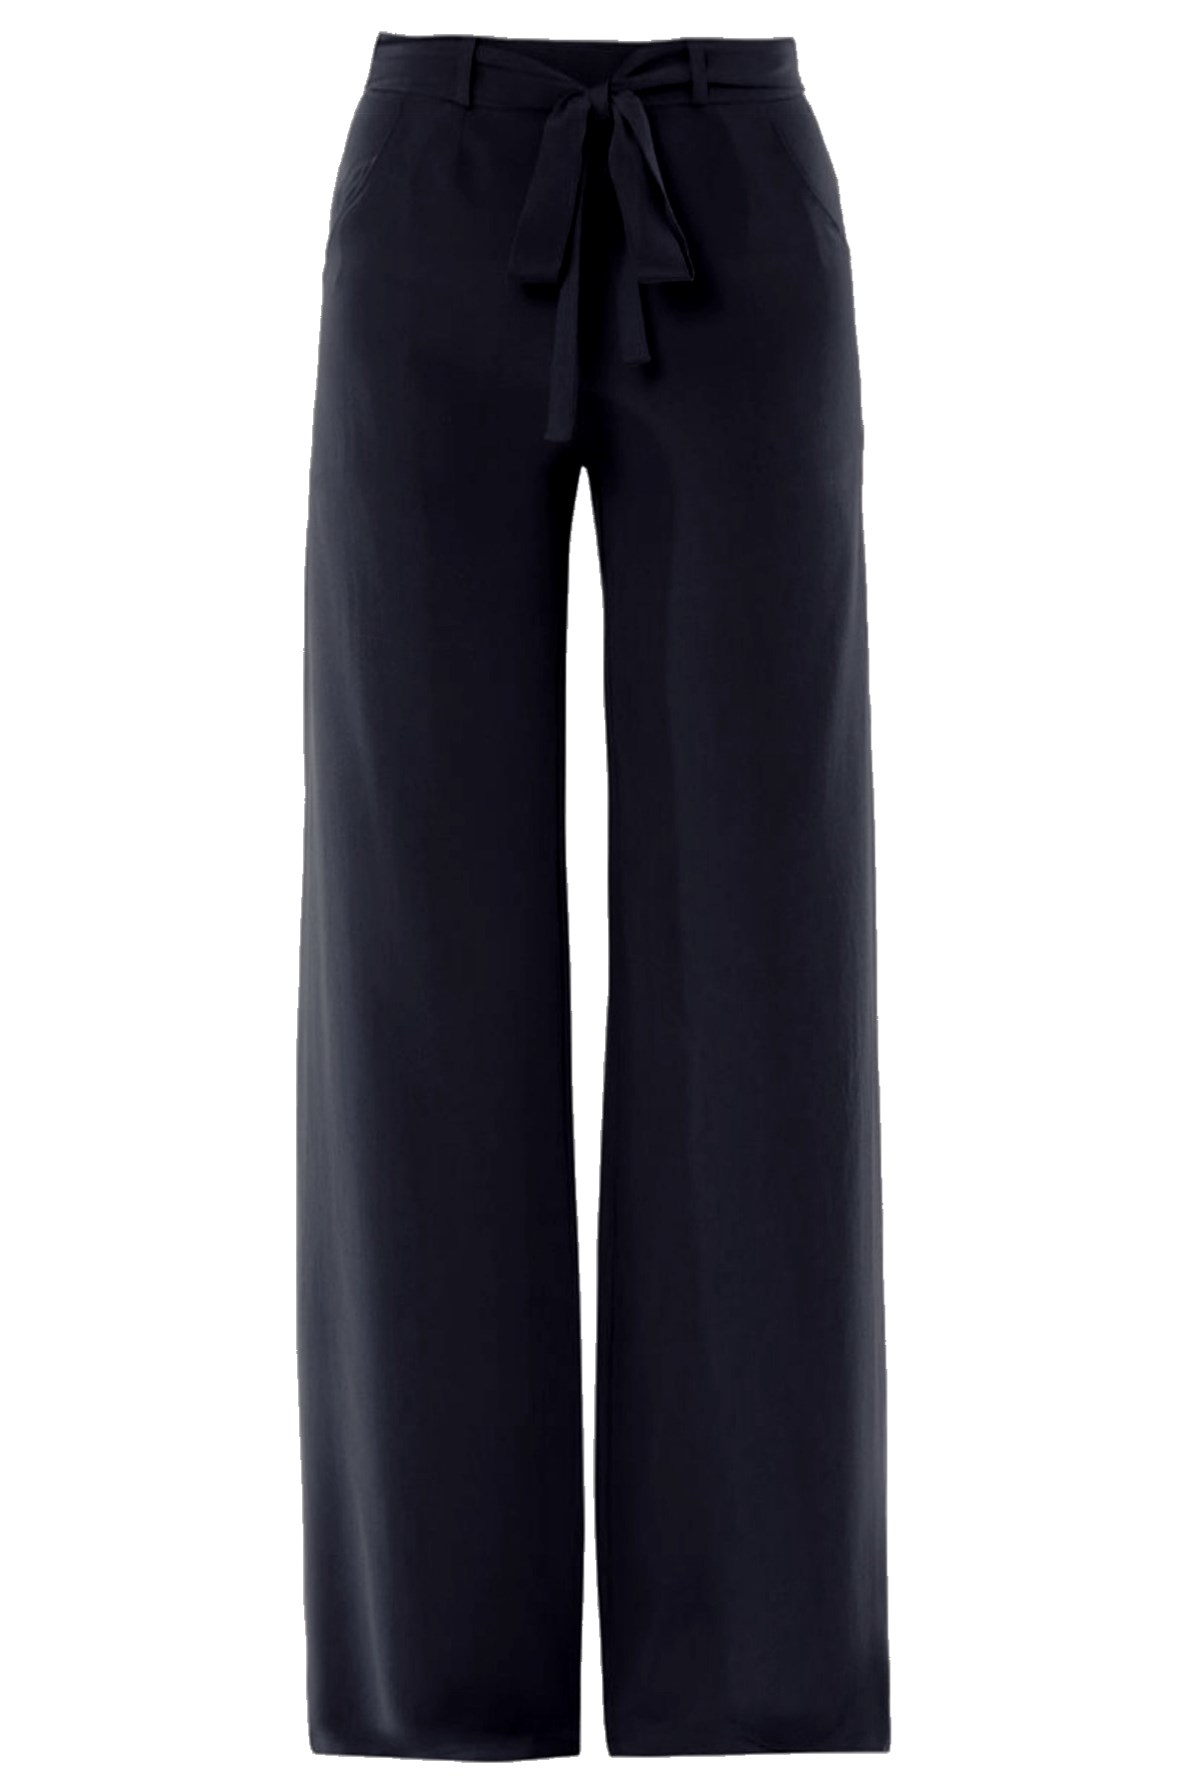 Palazzo Silk Pant Black With Tie – Haute on High